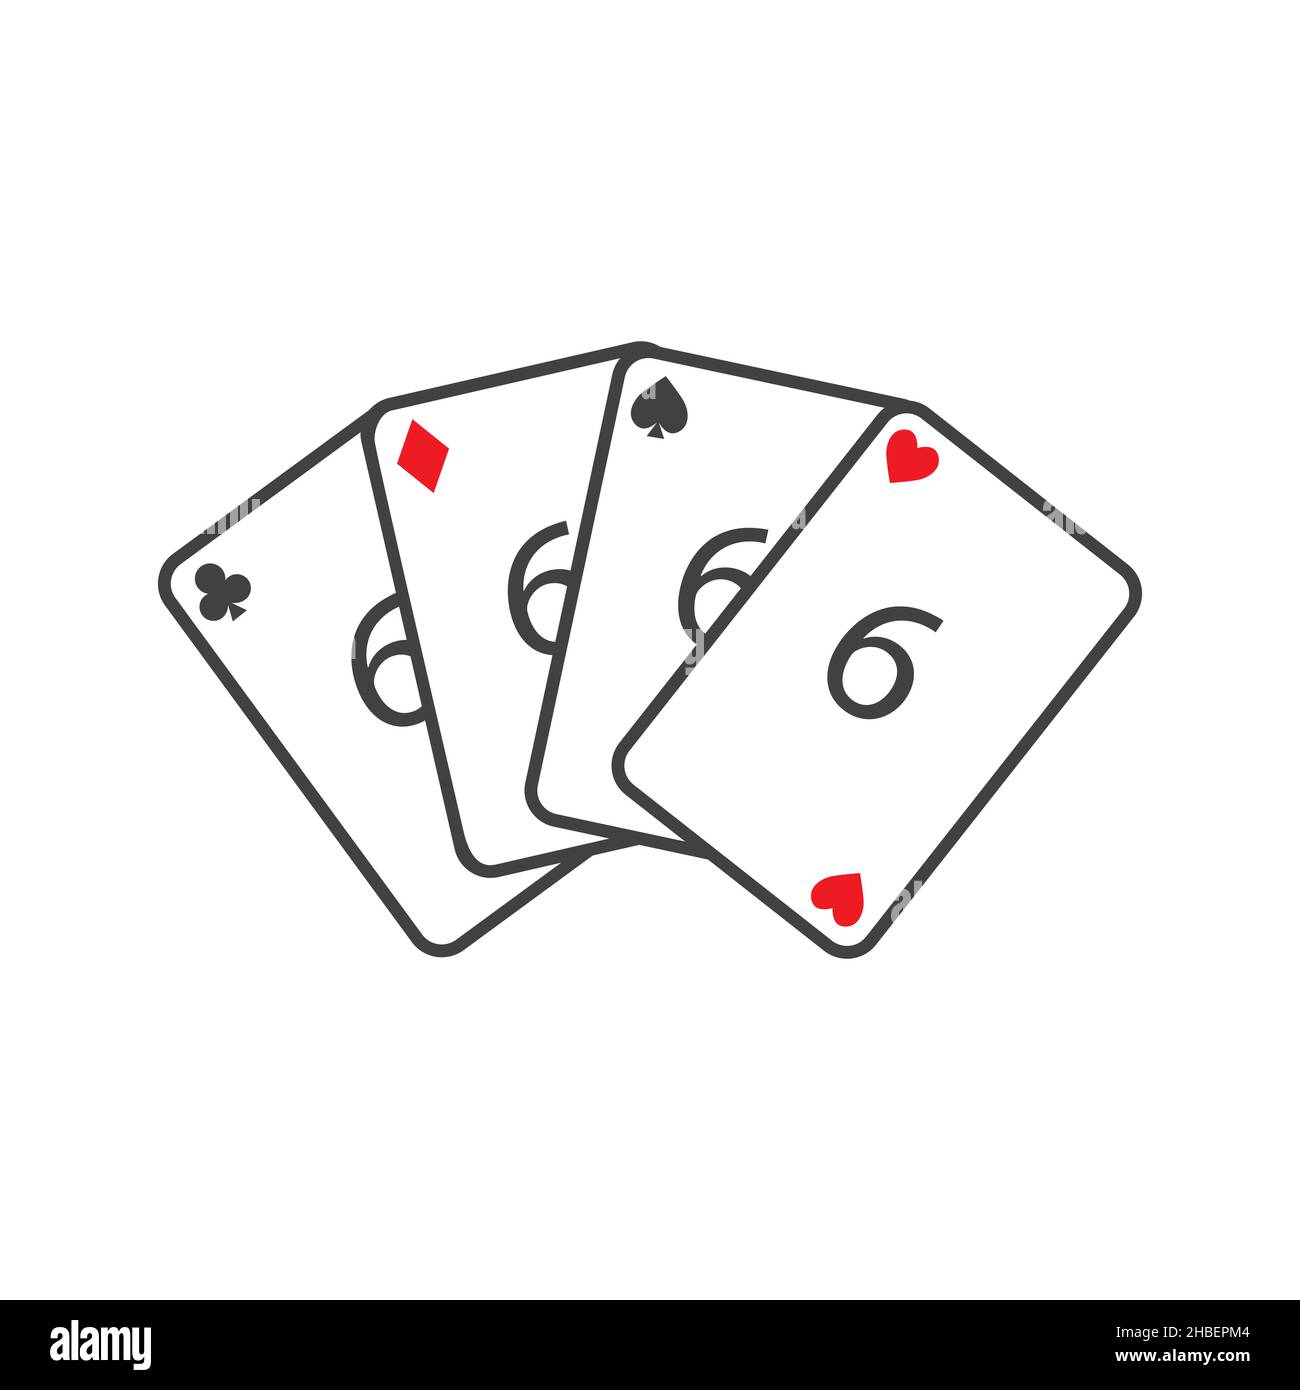 Four Playing Cards on White Background Showing Sixes - Hearts, Clubs, Spades and Diamonds vector Stock Vector